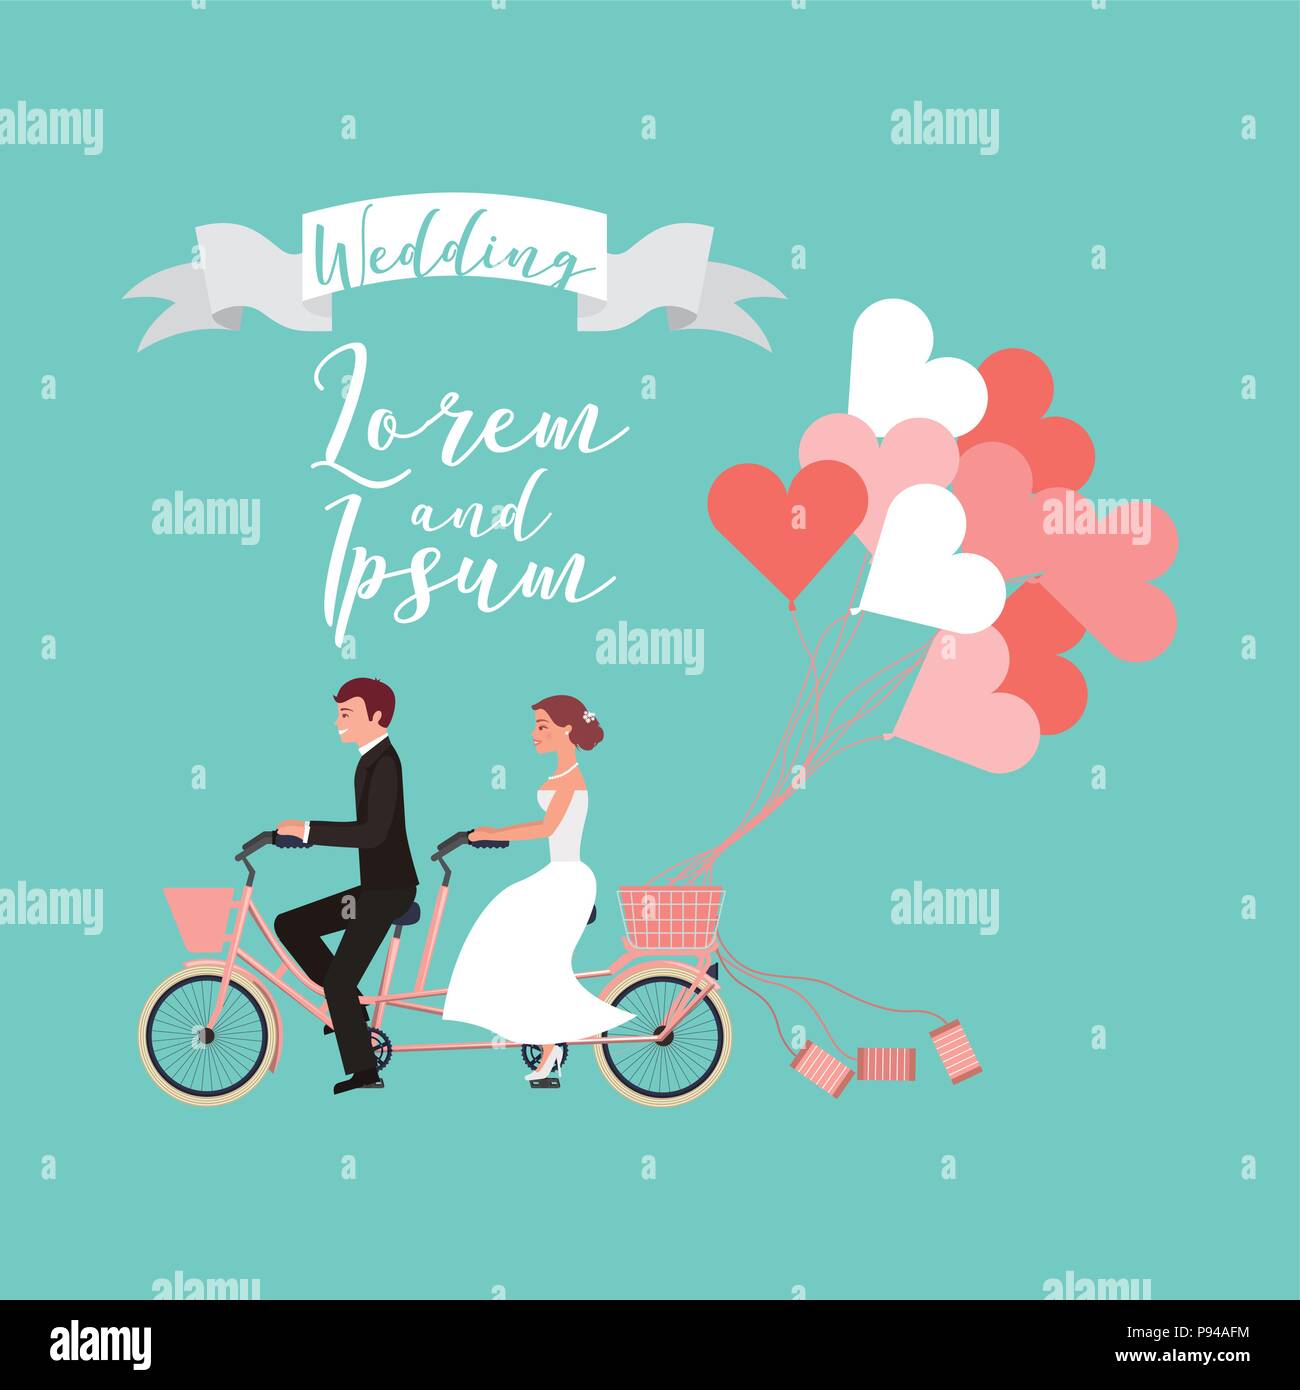 Bride And Groom On Tandem Bicycle With Balloons Wedding Day Vector